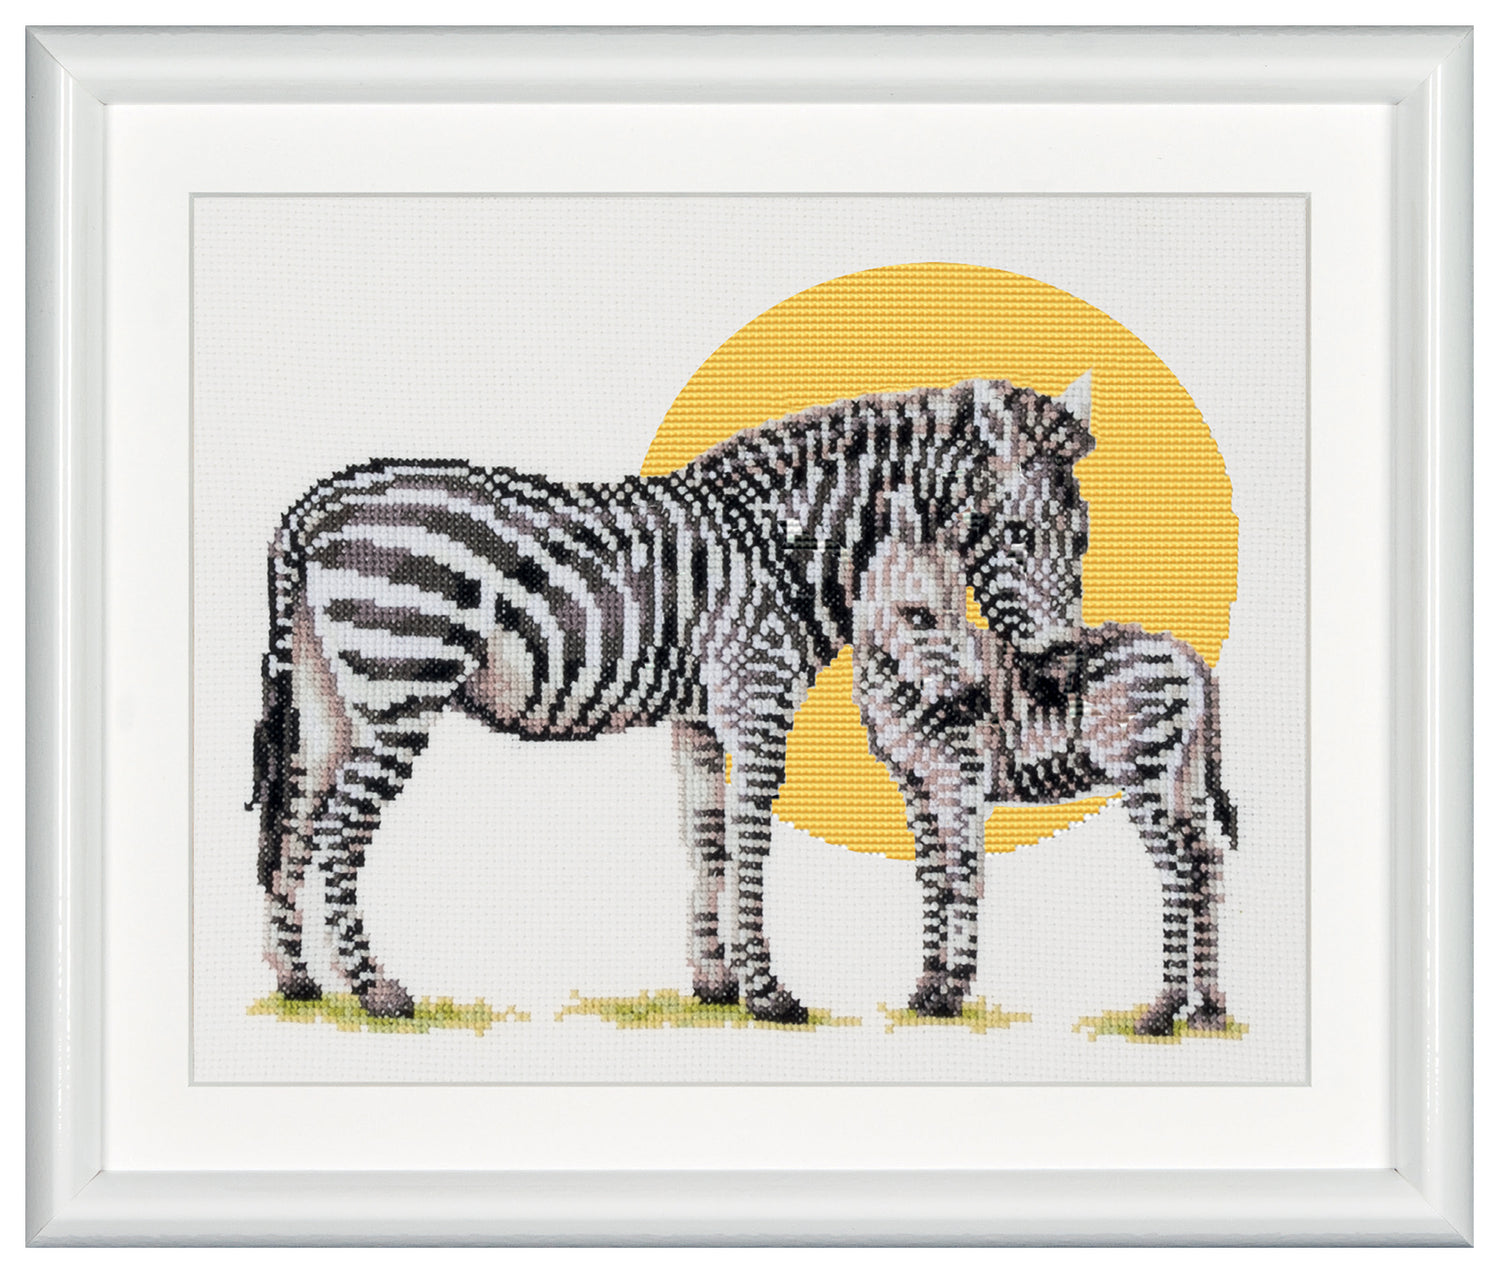 This nicely assorted embroidery kit can help if you want to take your embroidery skills to the next level. The detailed depiction of a zebra with a young one looks beautiful with the contrast of the yellow sun and green grass, a vibrant color palette. From eyes and tail to zebra arch, every intricacy is visible. DSB cross stitch kits have easy to follow design charts and contain all items needed to facilitate embroidery without hassle. To cater to both beginners as well as advanced stitching artists.